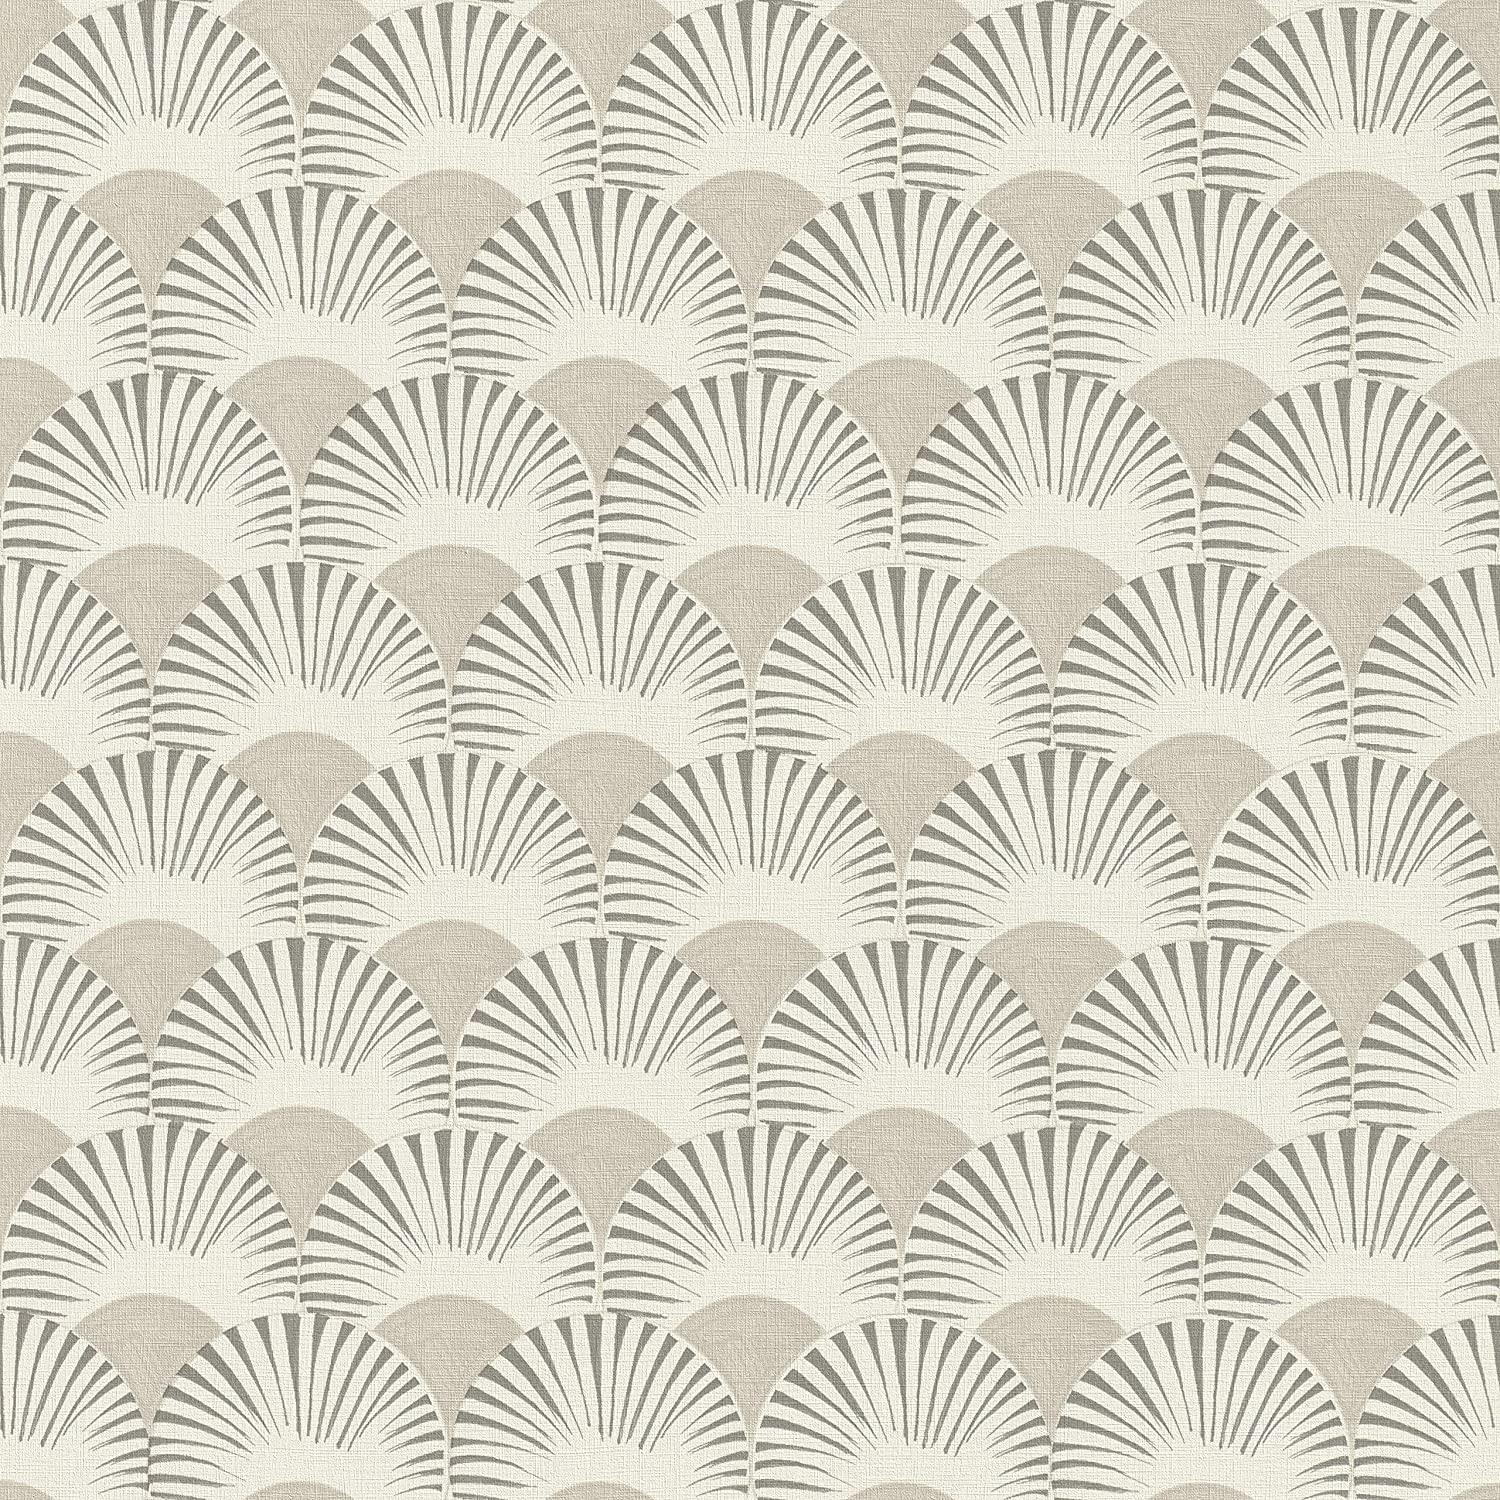 Rasch Studio Onszelf Geometric Fan Motif Beige Non-Woven Wallpaper 539301 with Graphic Fan Pattern in White and Grey with Light Structure